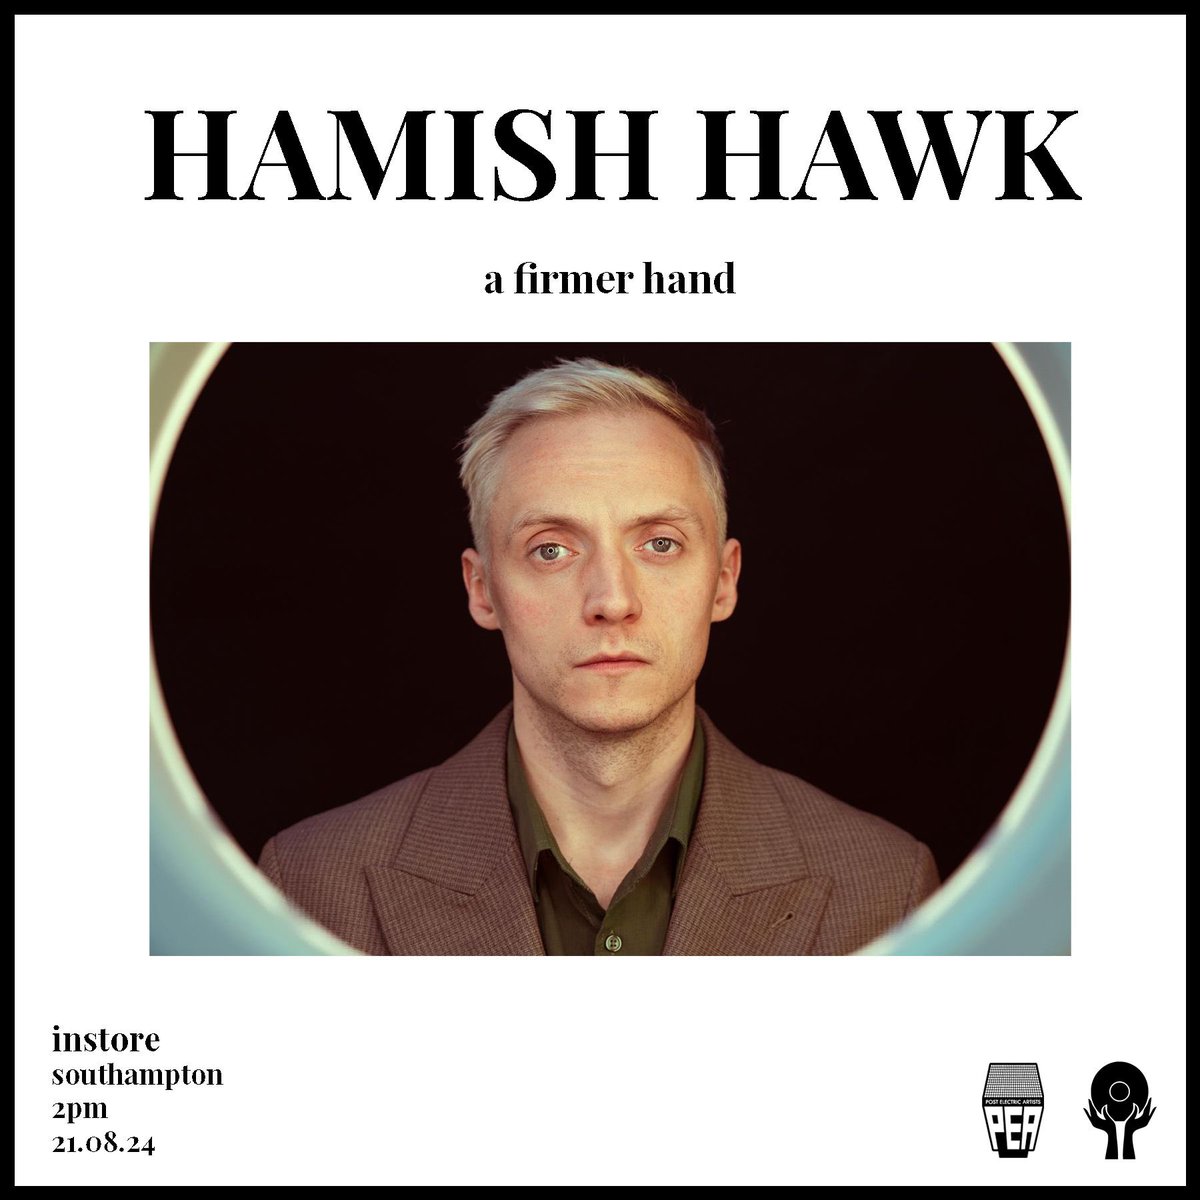 HAMISH HAWK // A FIRMER HAND Afternoon instore & signing 21.8.24 2pm Ticket bundles available now on our web store Vinilo.co.uk